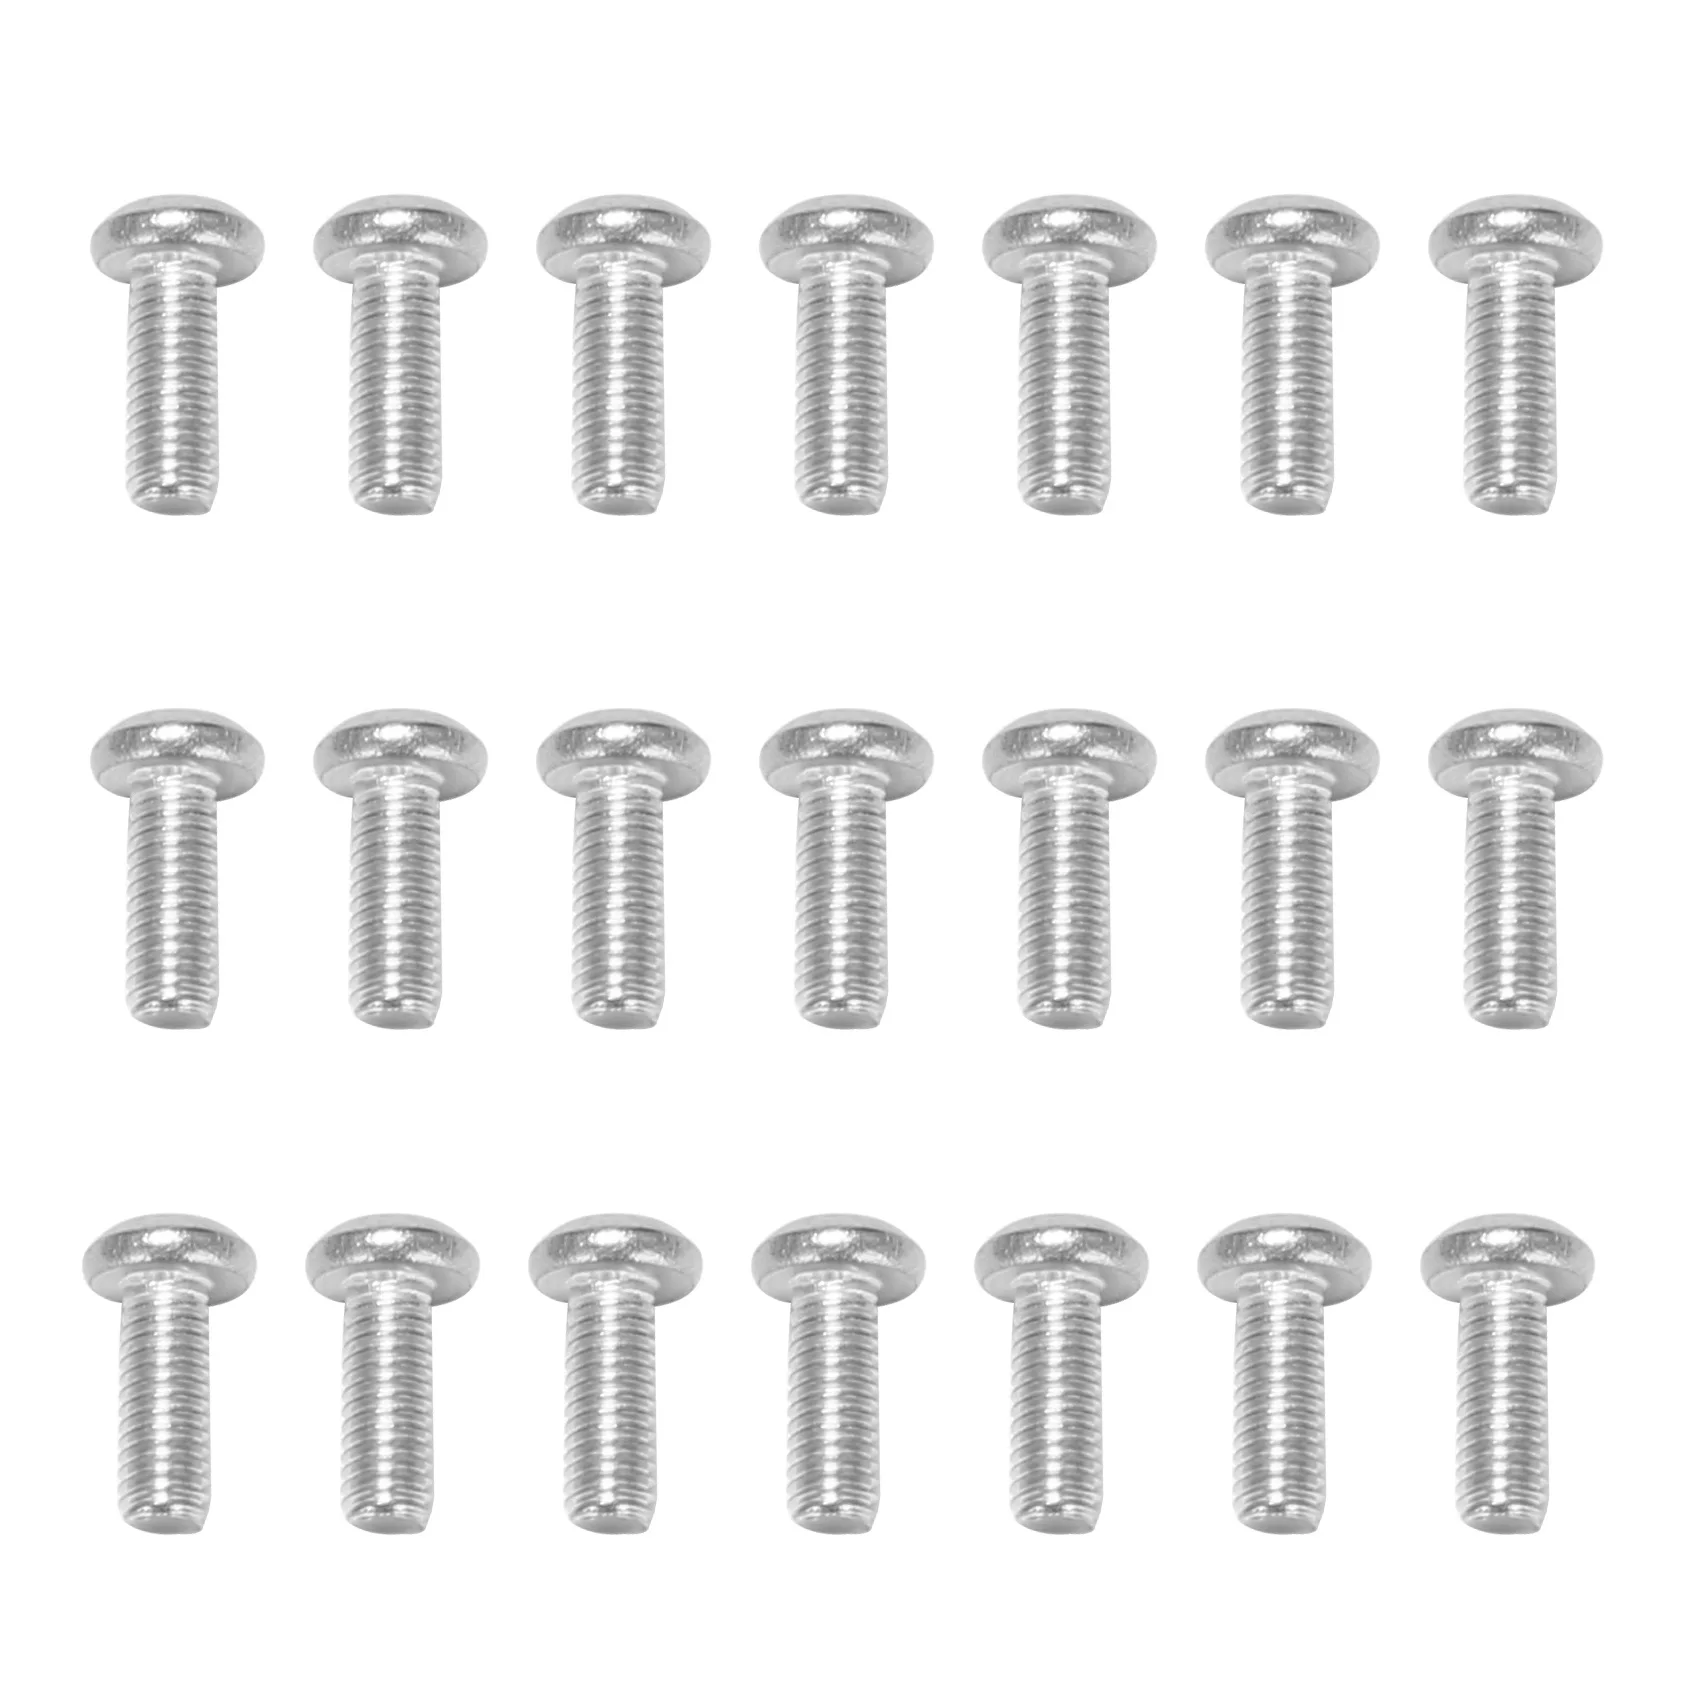 

21Pcs for Xiaomi Mijia M365/Pro Electric Scooter Floor Anti-Theft Screw for Fixing the Battery Compartment Cover